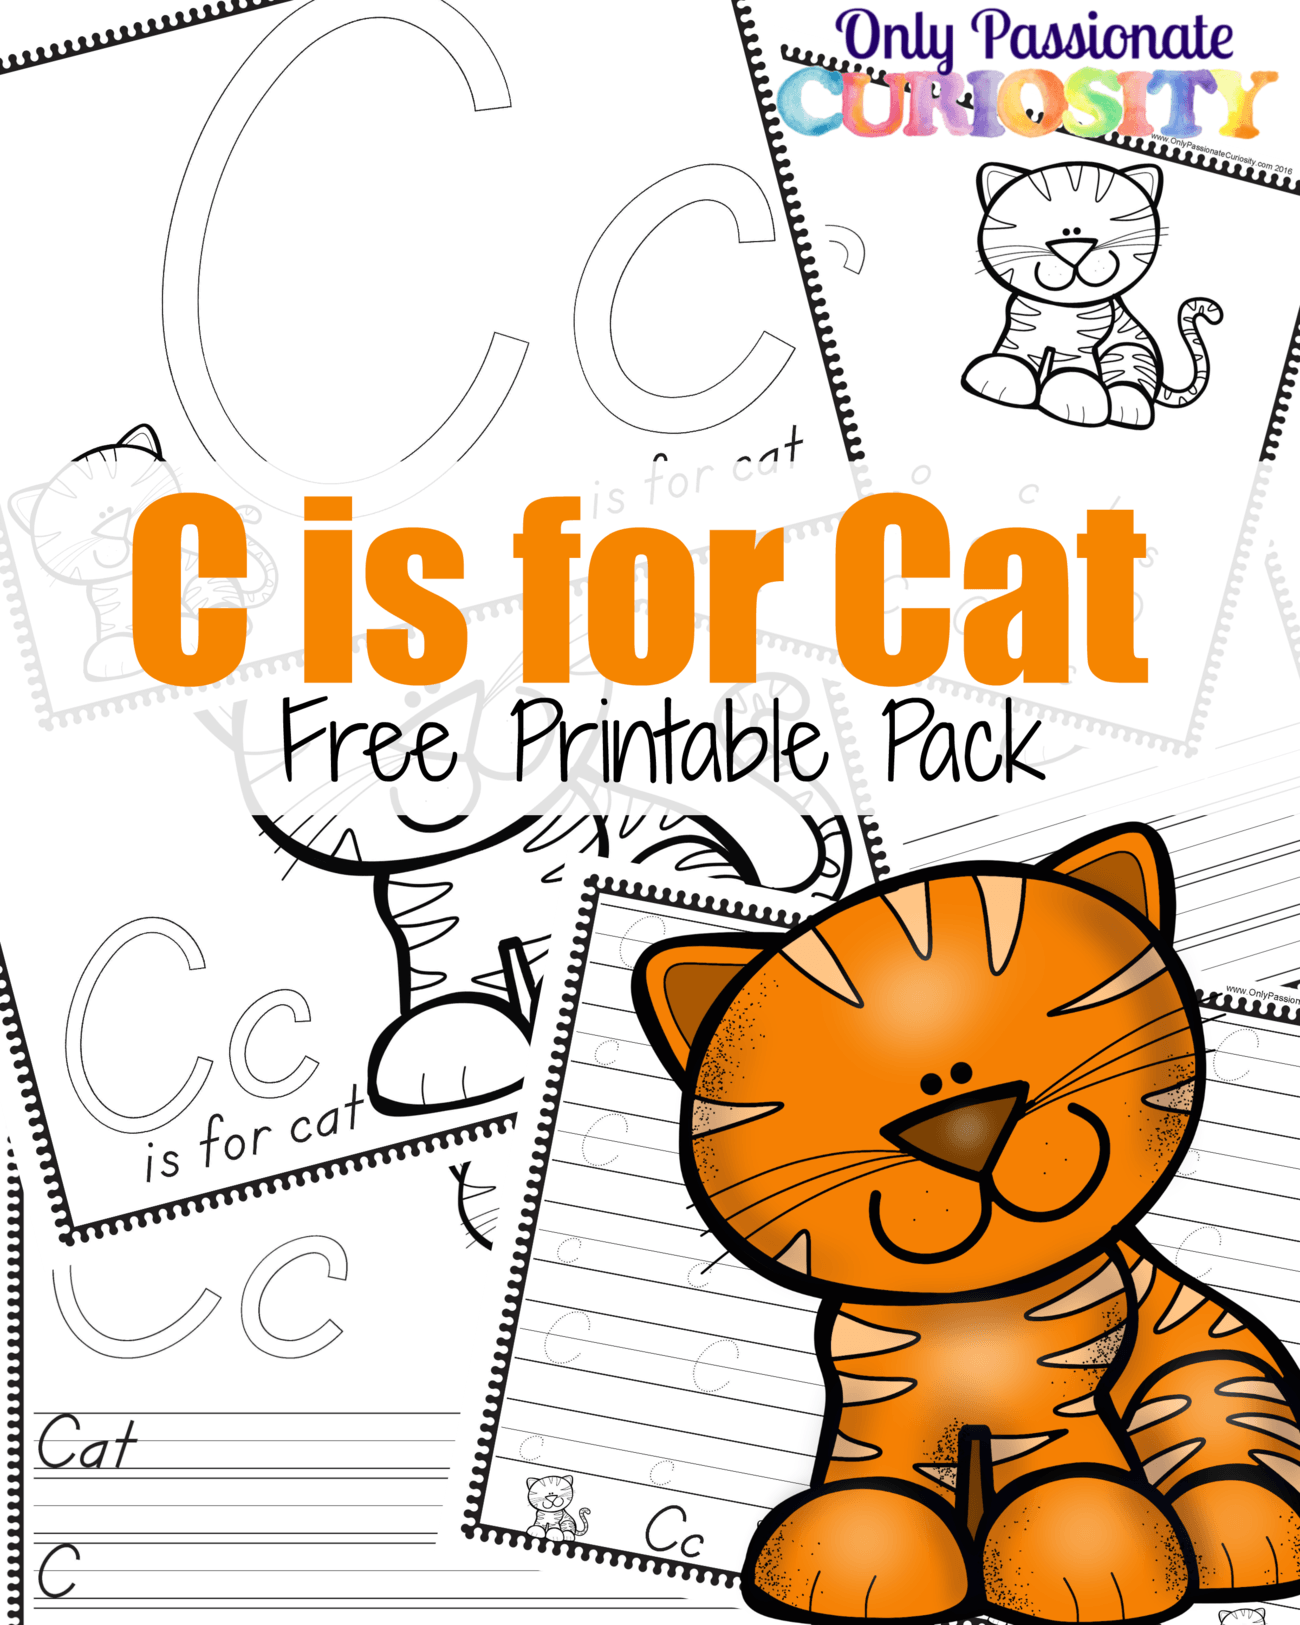 C is for Cat Handwriting Activity Pack